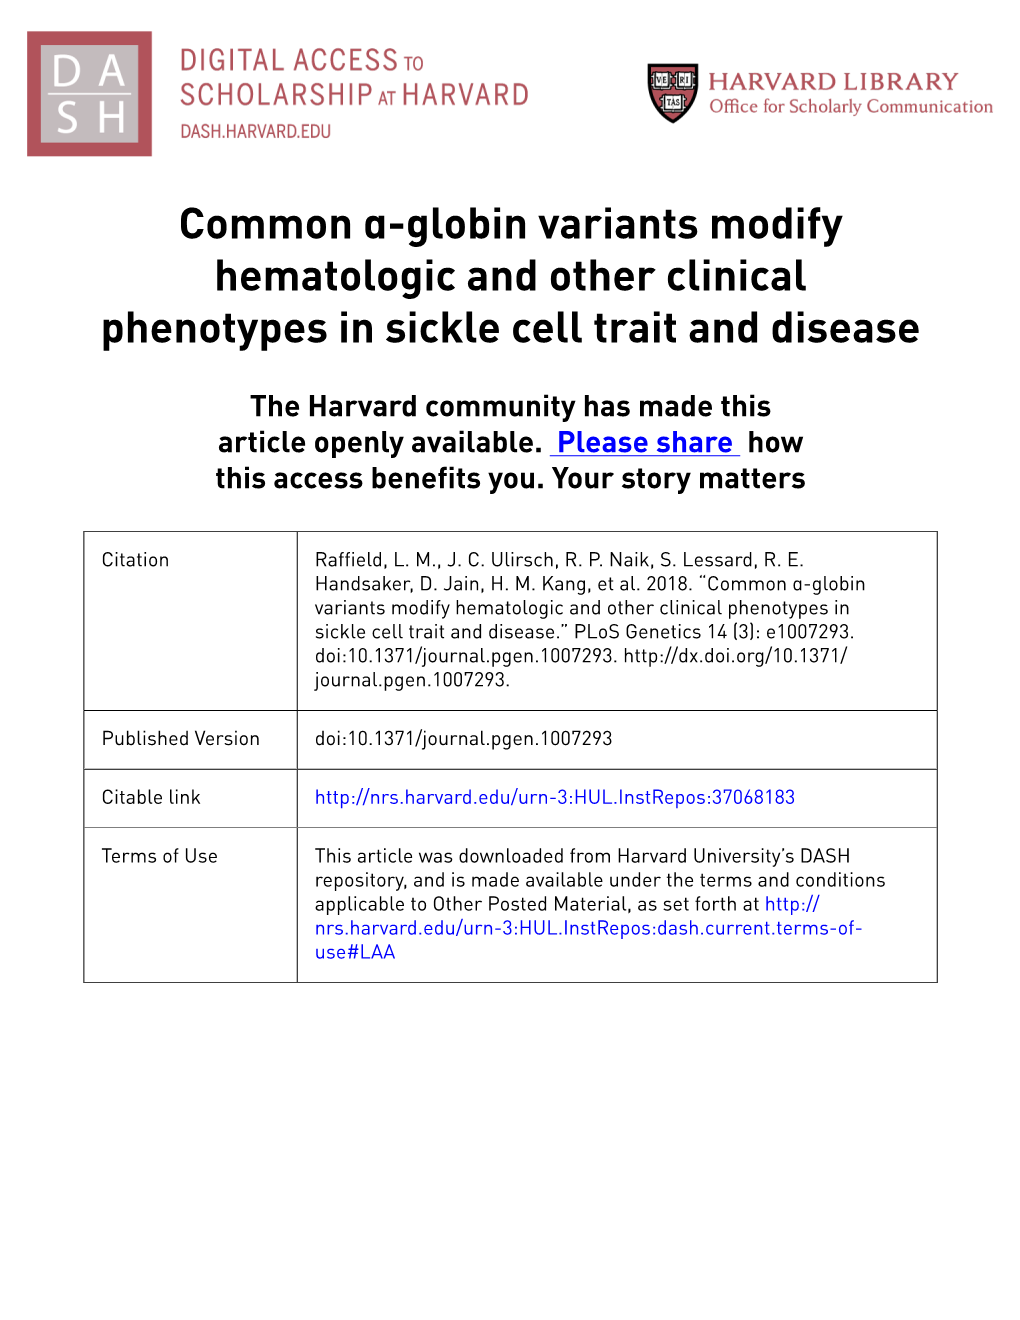 Globin Variants Modify Hematologic and Other Clinical Phenotypes in Sickle Cell Trait and Disease